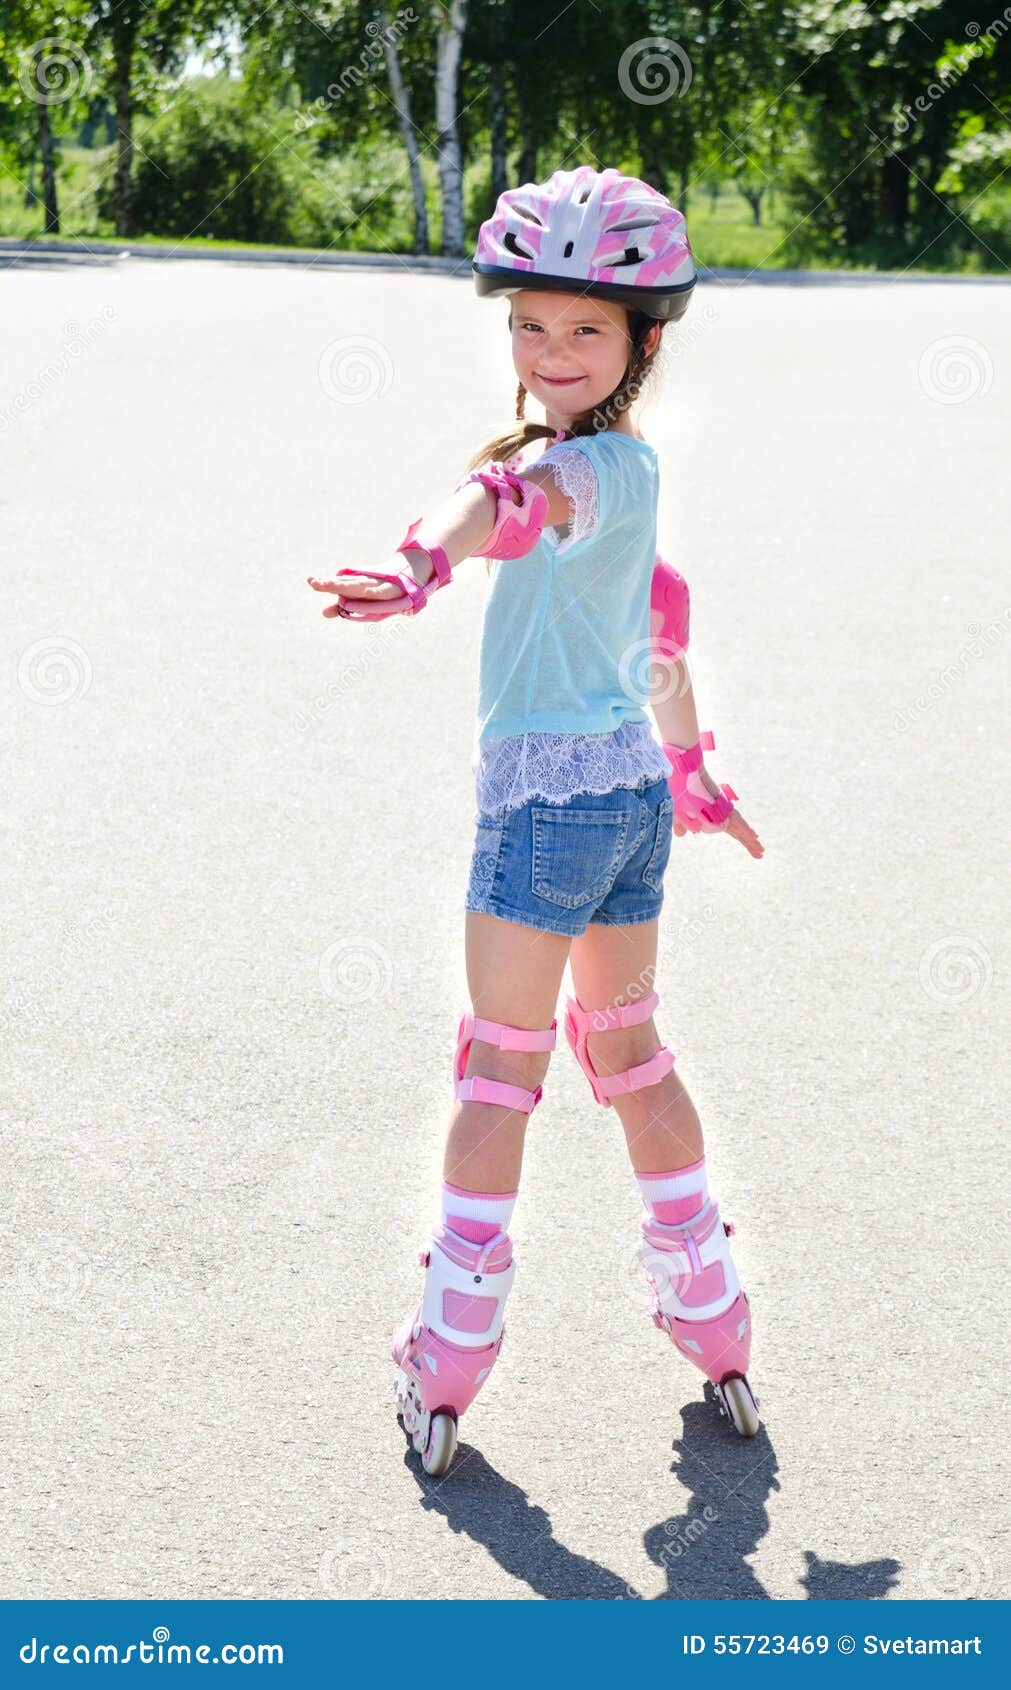 Cute Smiling Little Girl In Pink Roller Skates Stock Image - Image of